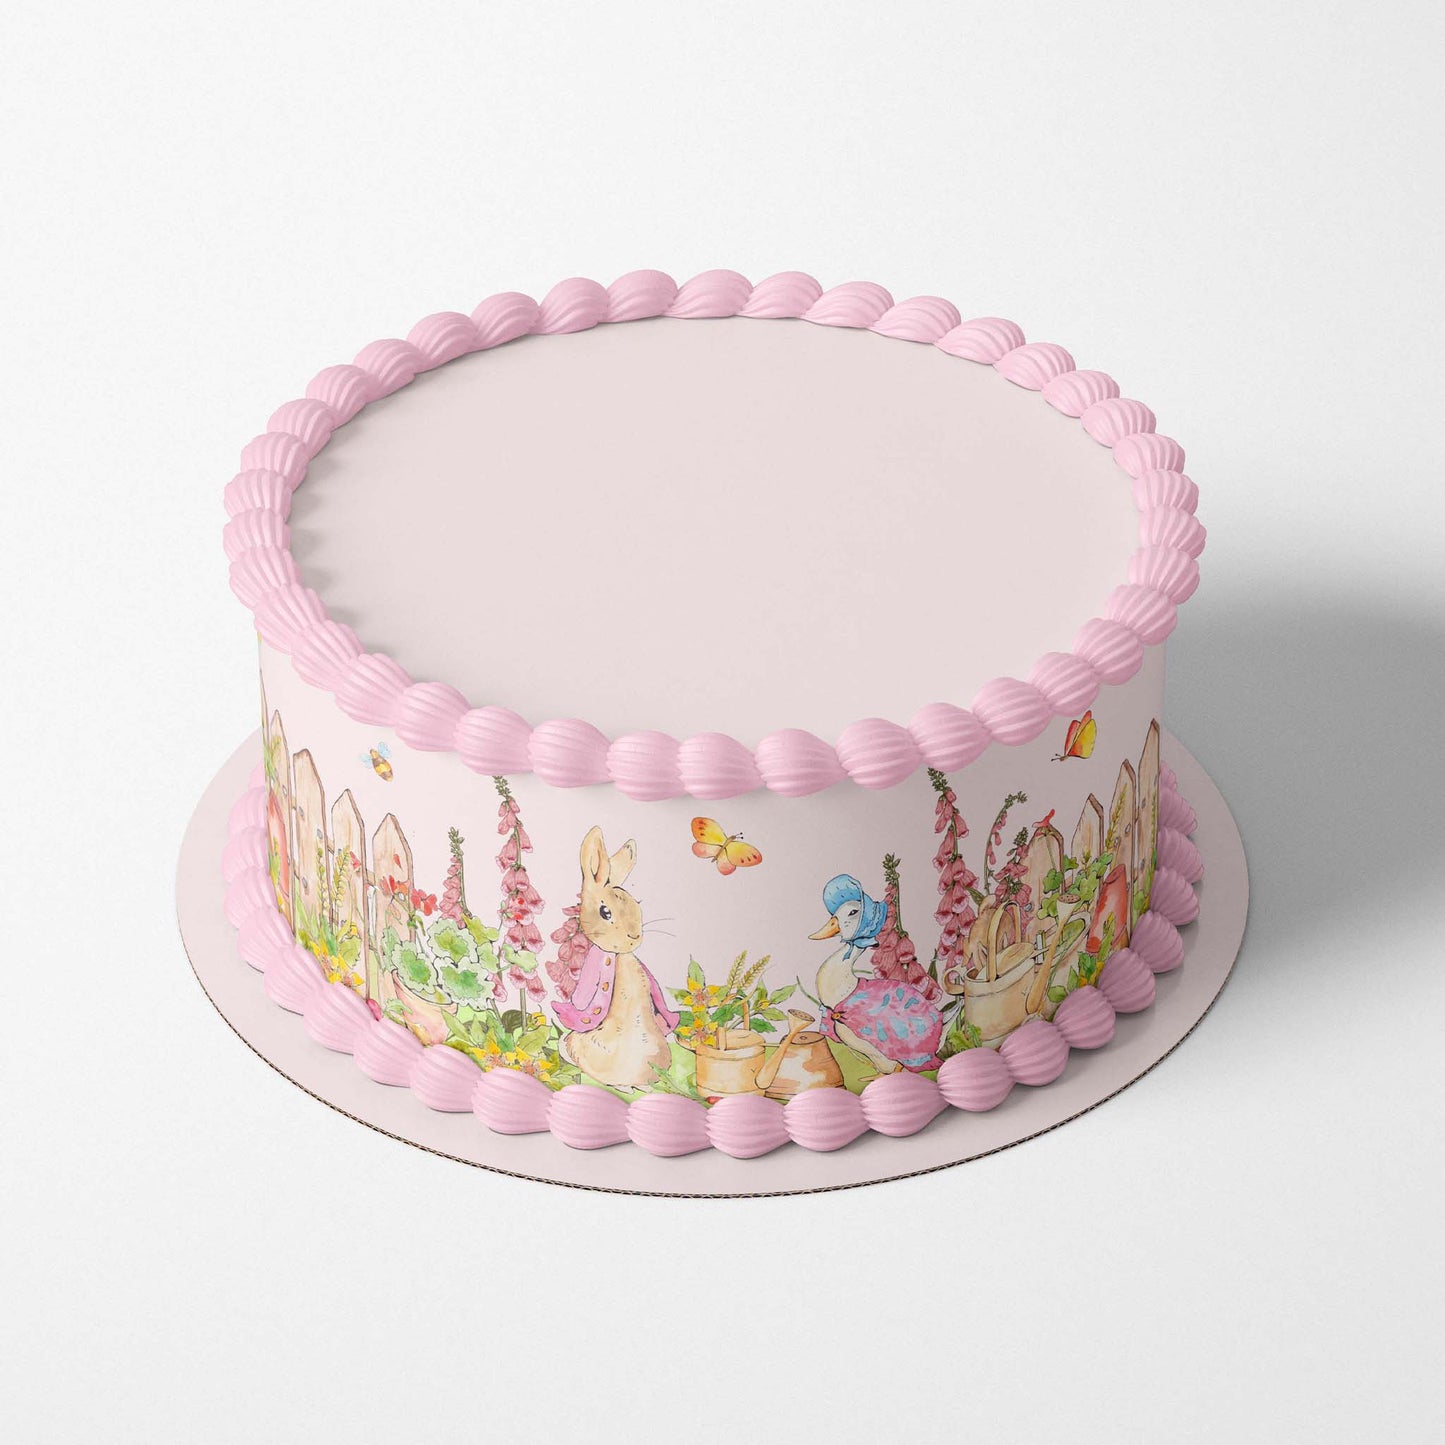 Add these adorable Beatrix Potter-inspired edible icing cake wrap featuring Peter Rabbit and Jemima Puddle-duck characters in the summer garden on cakes or any sweet treats. These sweet icing sheets are perfect for a baby shower, or Beatrix Potter themed birthday party.